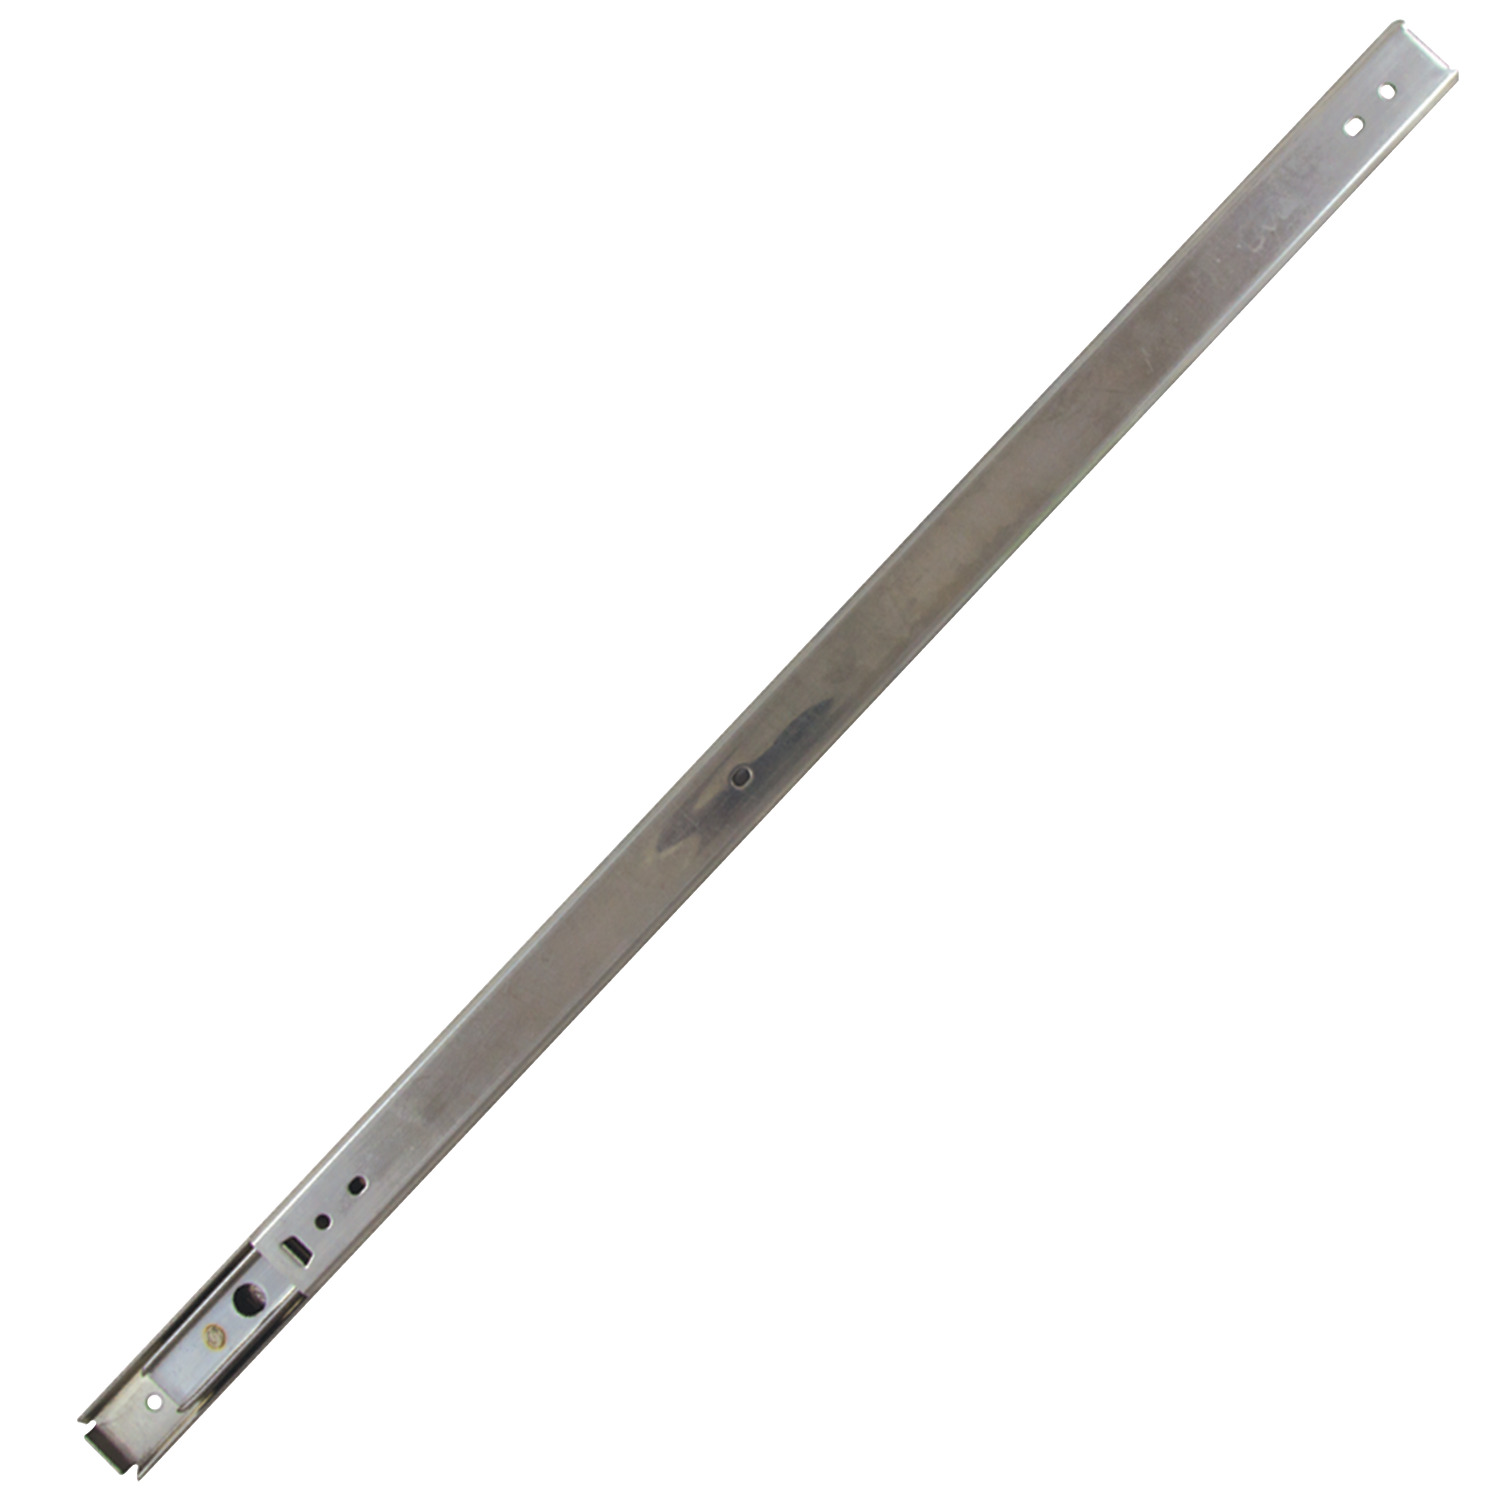 Product L2080, Drawer Slide - Full Extension 30 Kg load per pair - stainless / 